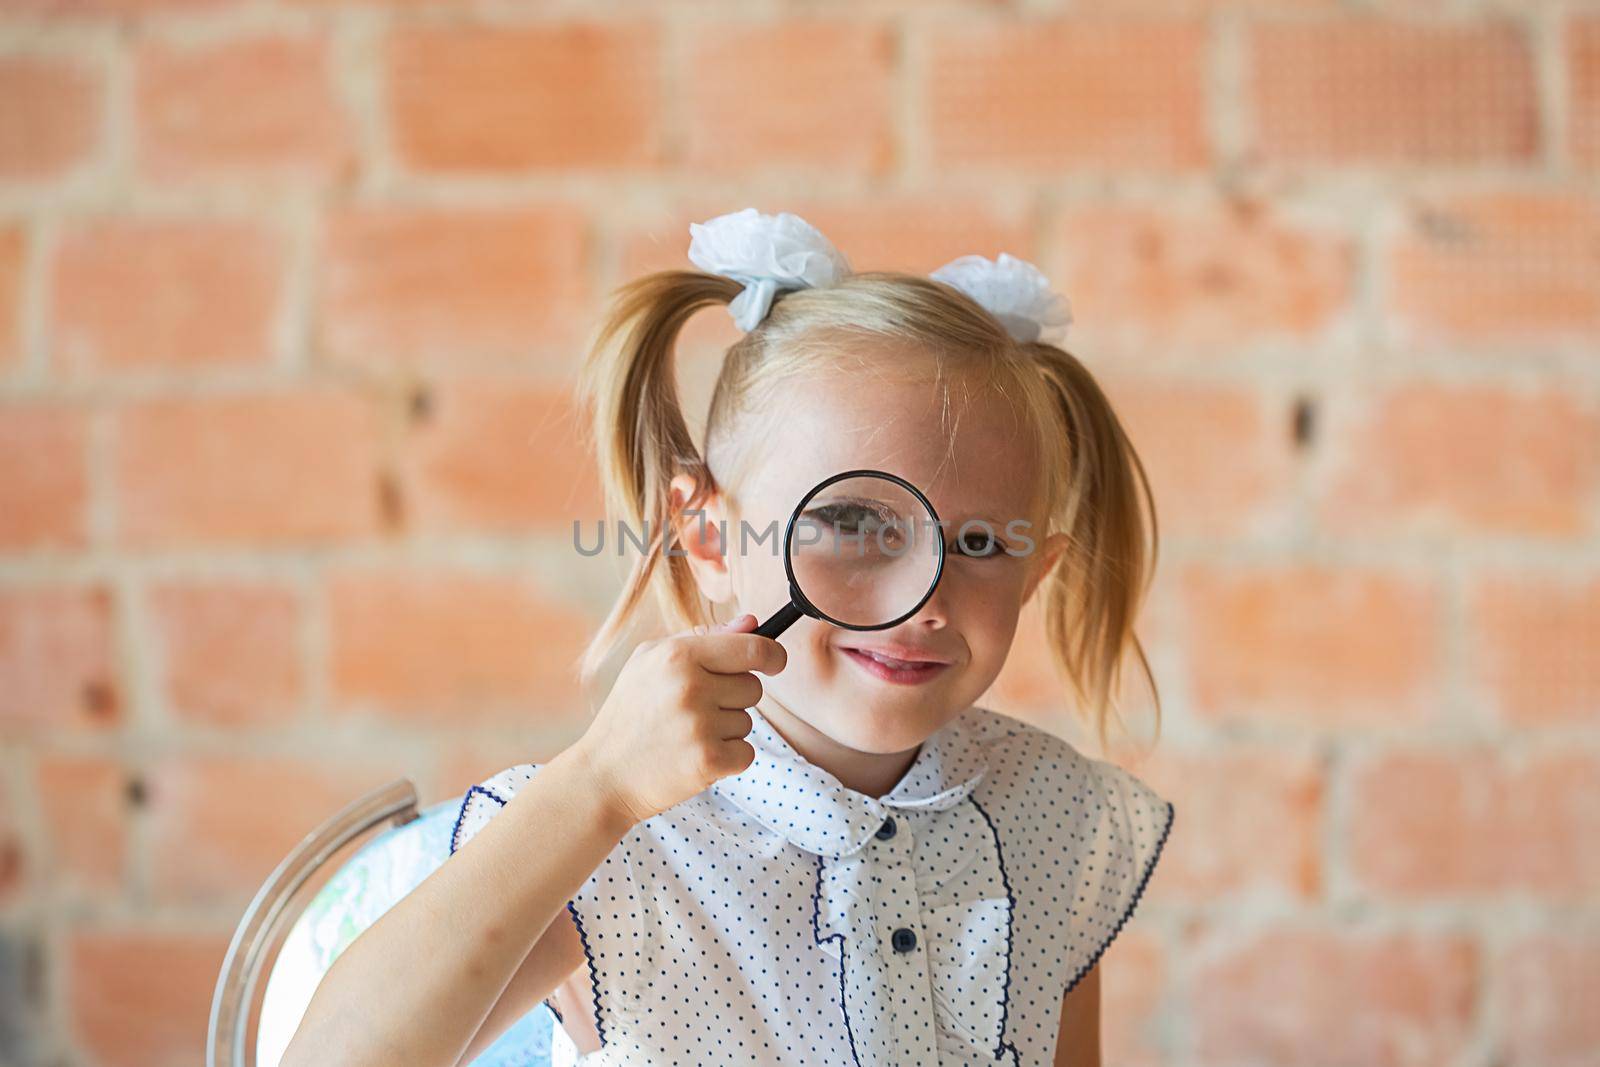 Cute little girl in school uniform with magnifier if front of her eye by galinasharapova